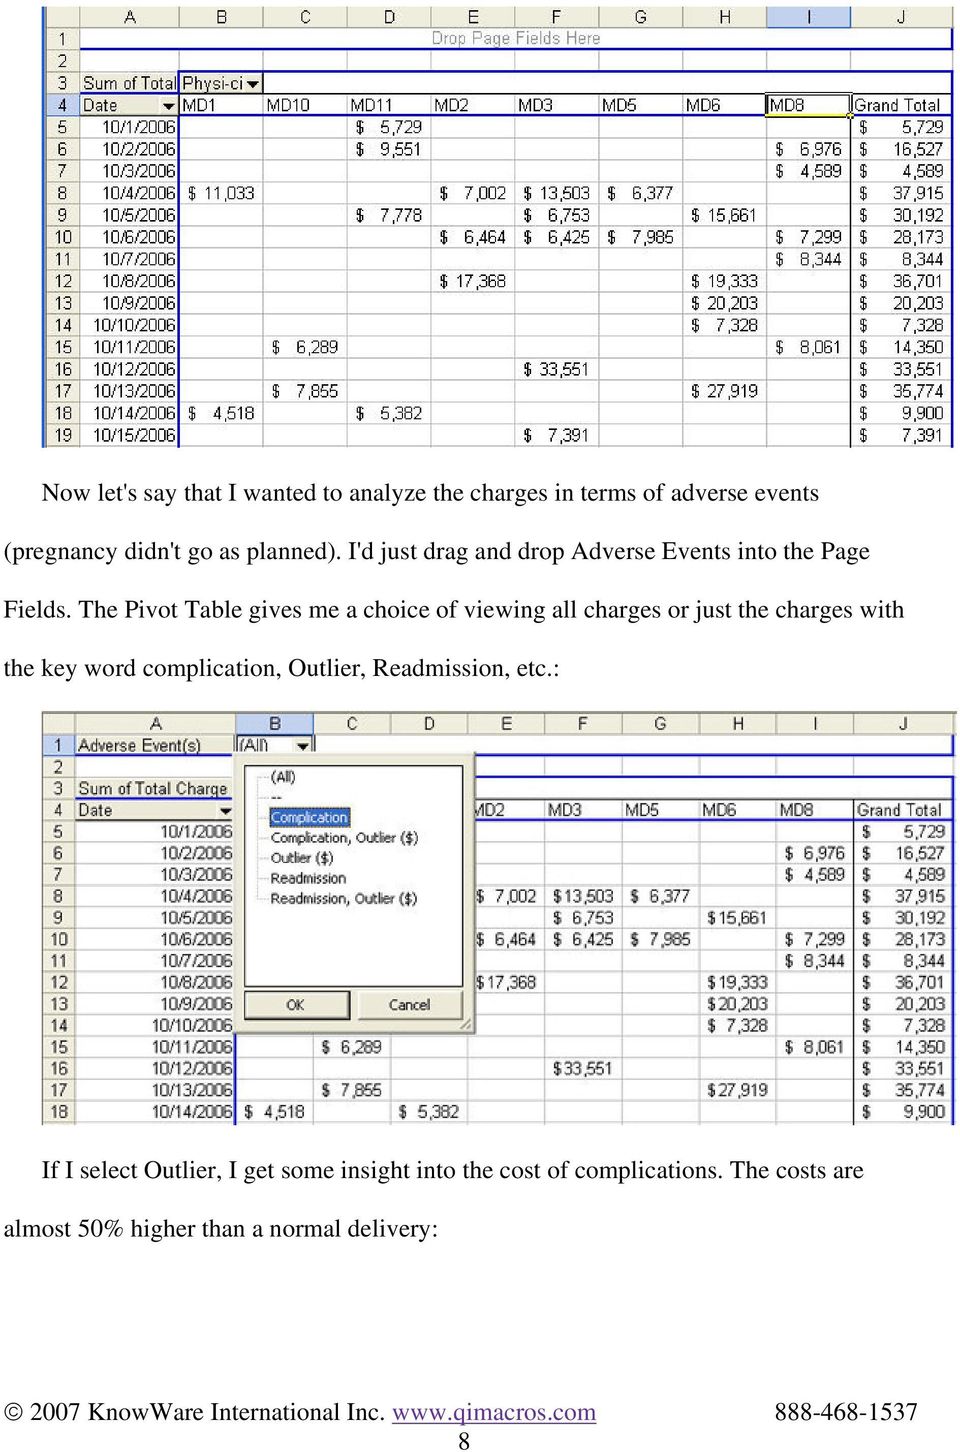 The Pivot Table gives me a choice of viewing all charges or just the charges with the key word complication,